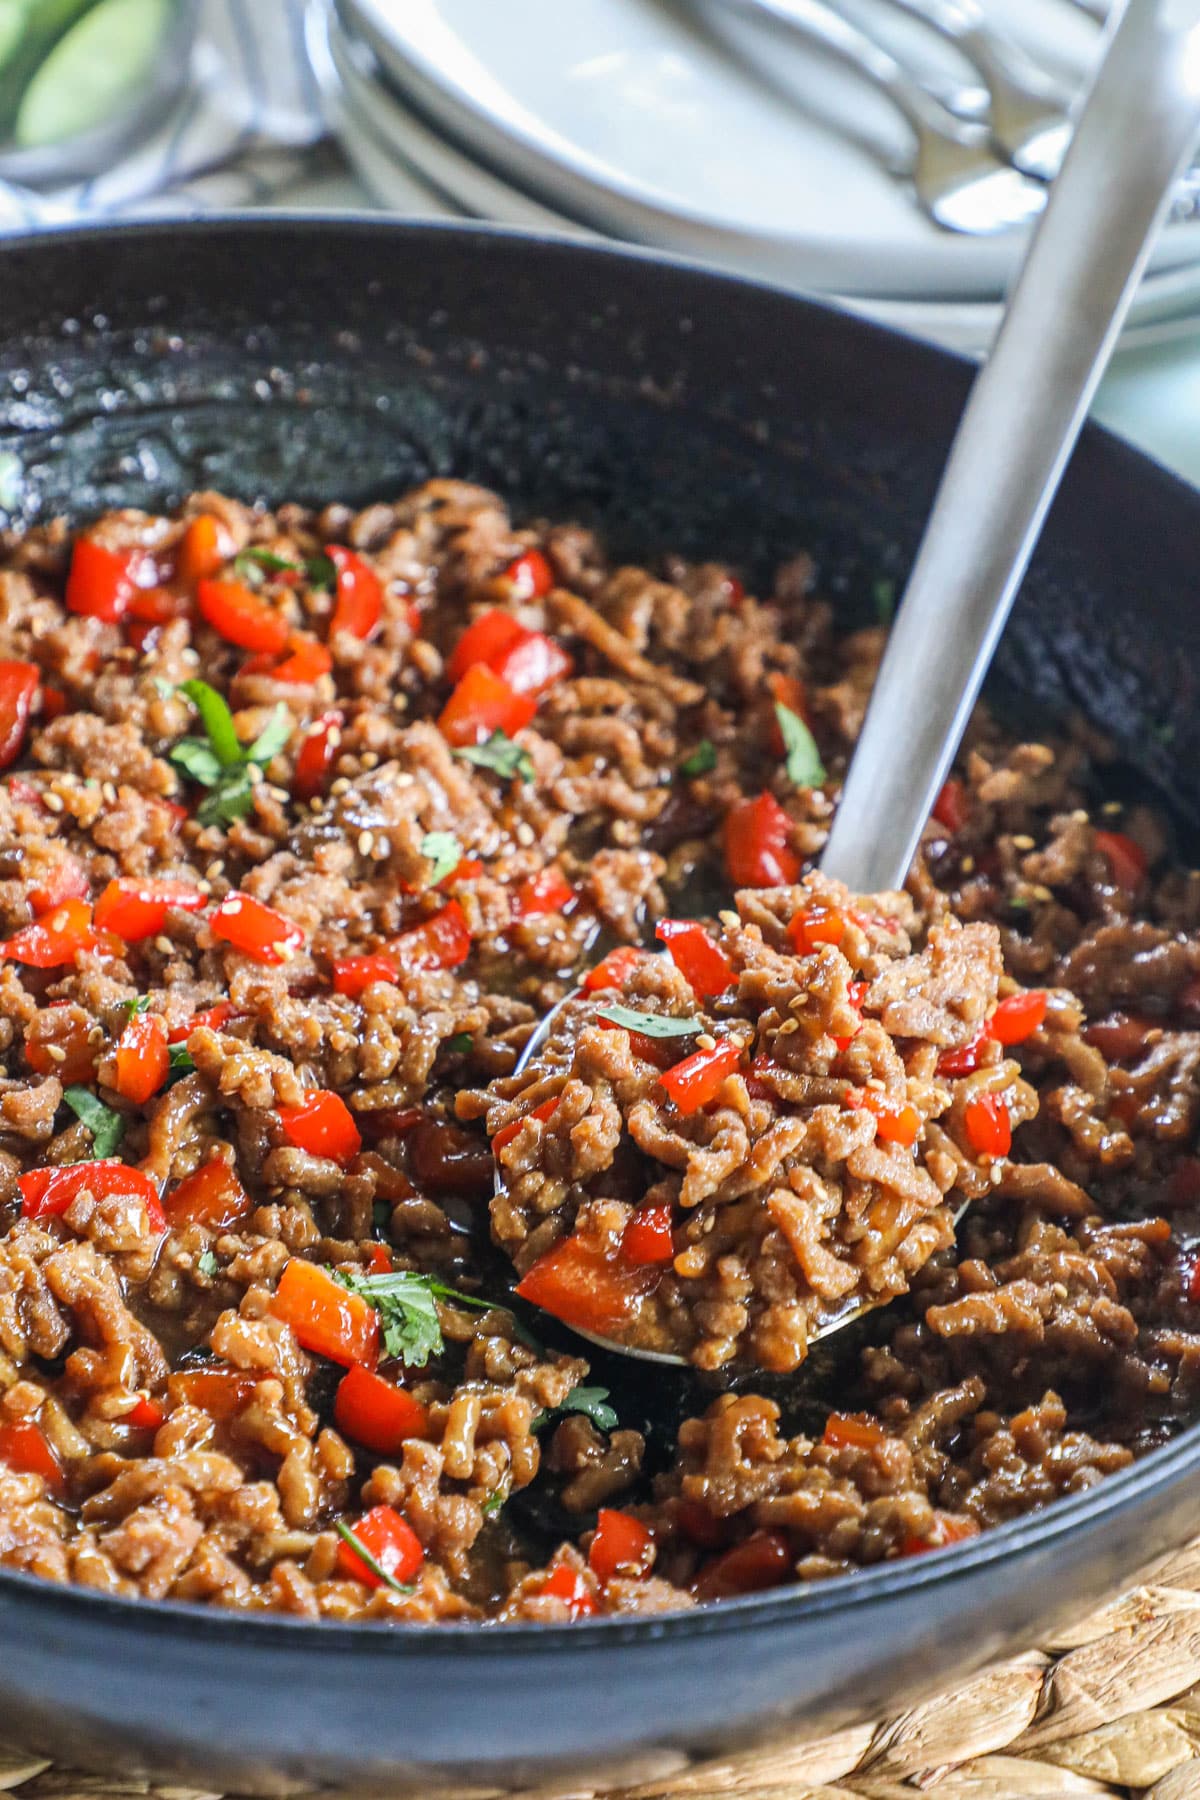 A spoon scooping up a serving of ground turkey teriyaki stir fry from a large pan.